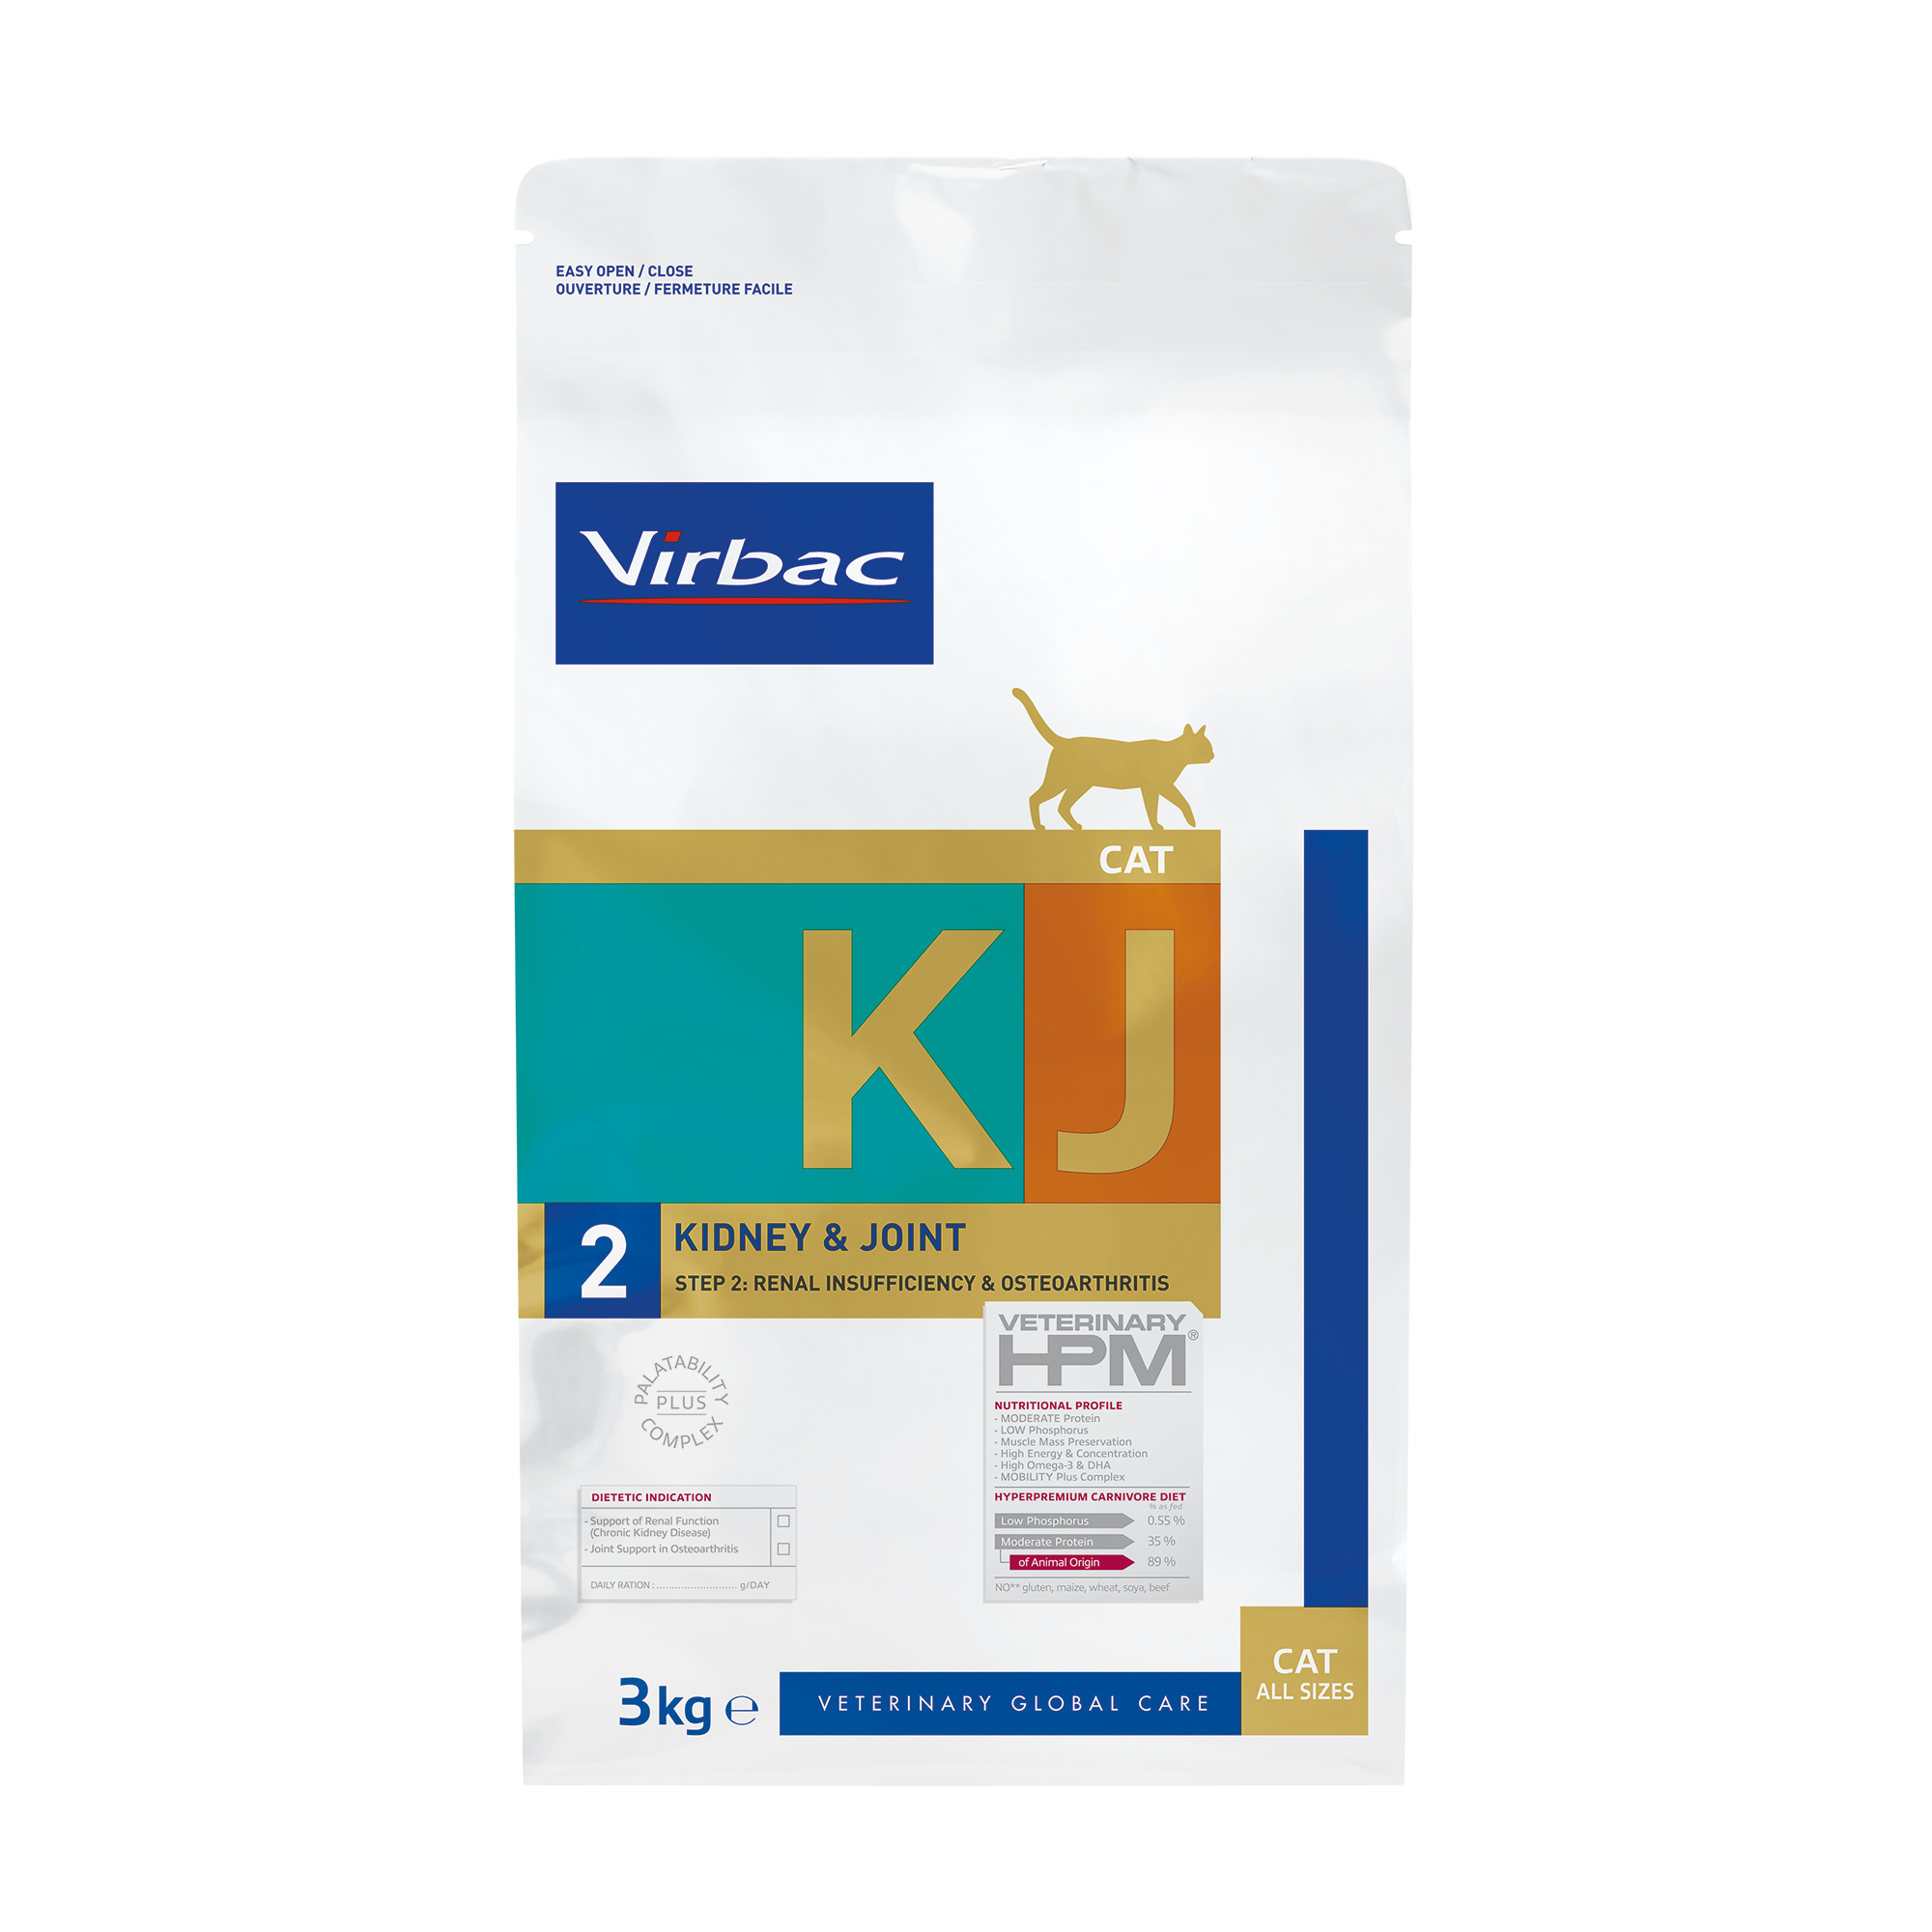 Virbac Veterinary HPM KJ2 - Kidney & Joint Support pour chat adulte